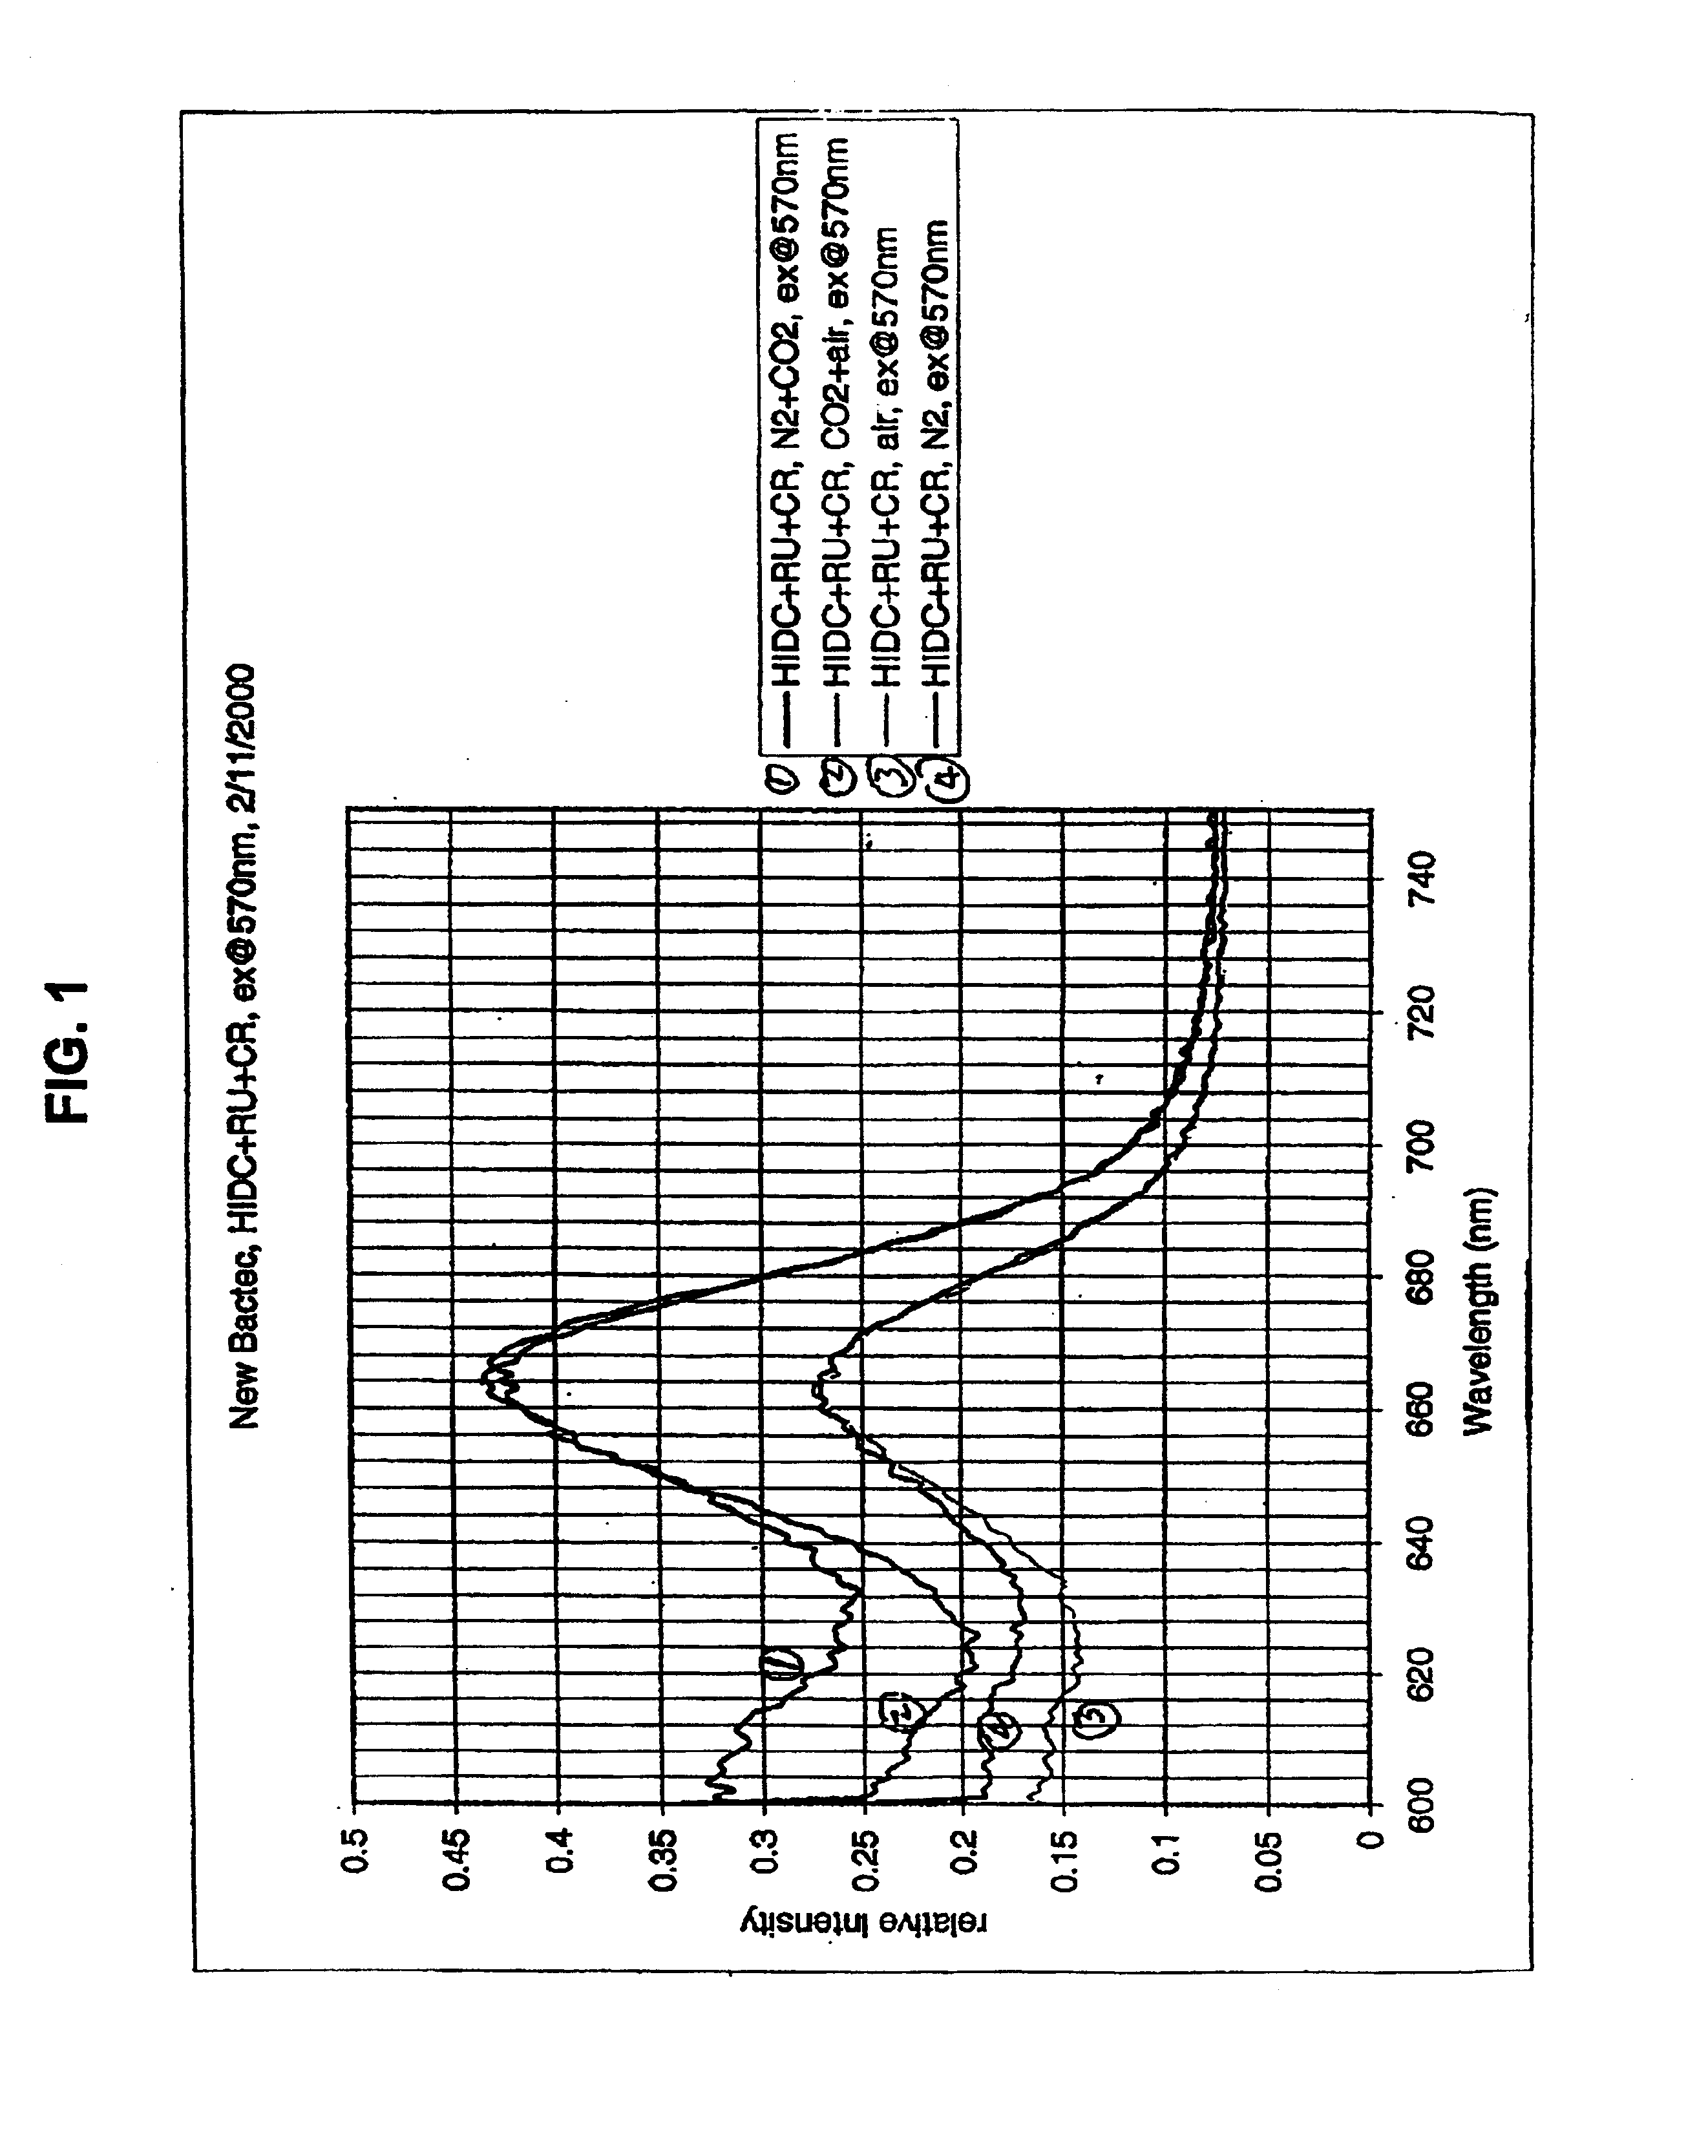 Sensor formulation for simultaneously monitoring at least two components of a gas composition